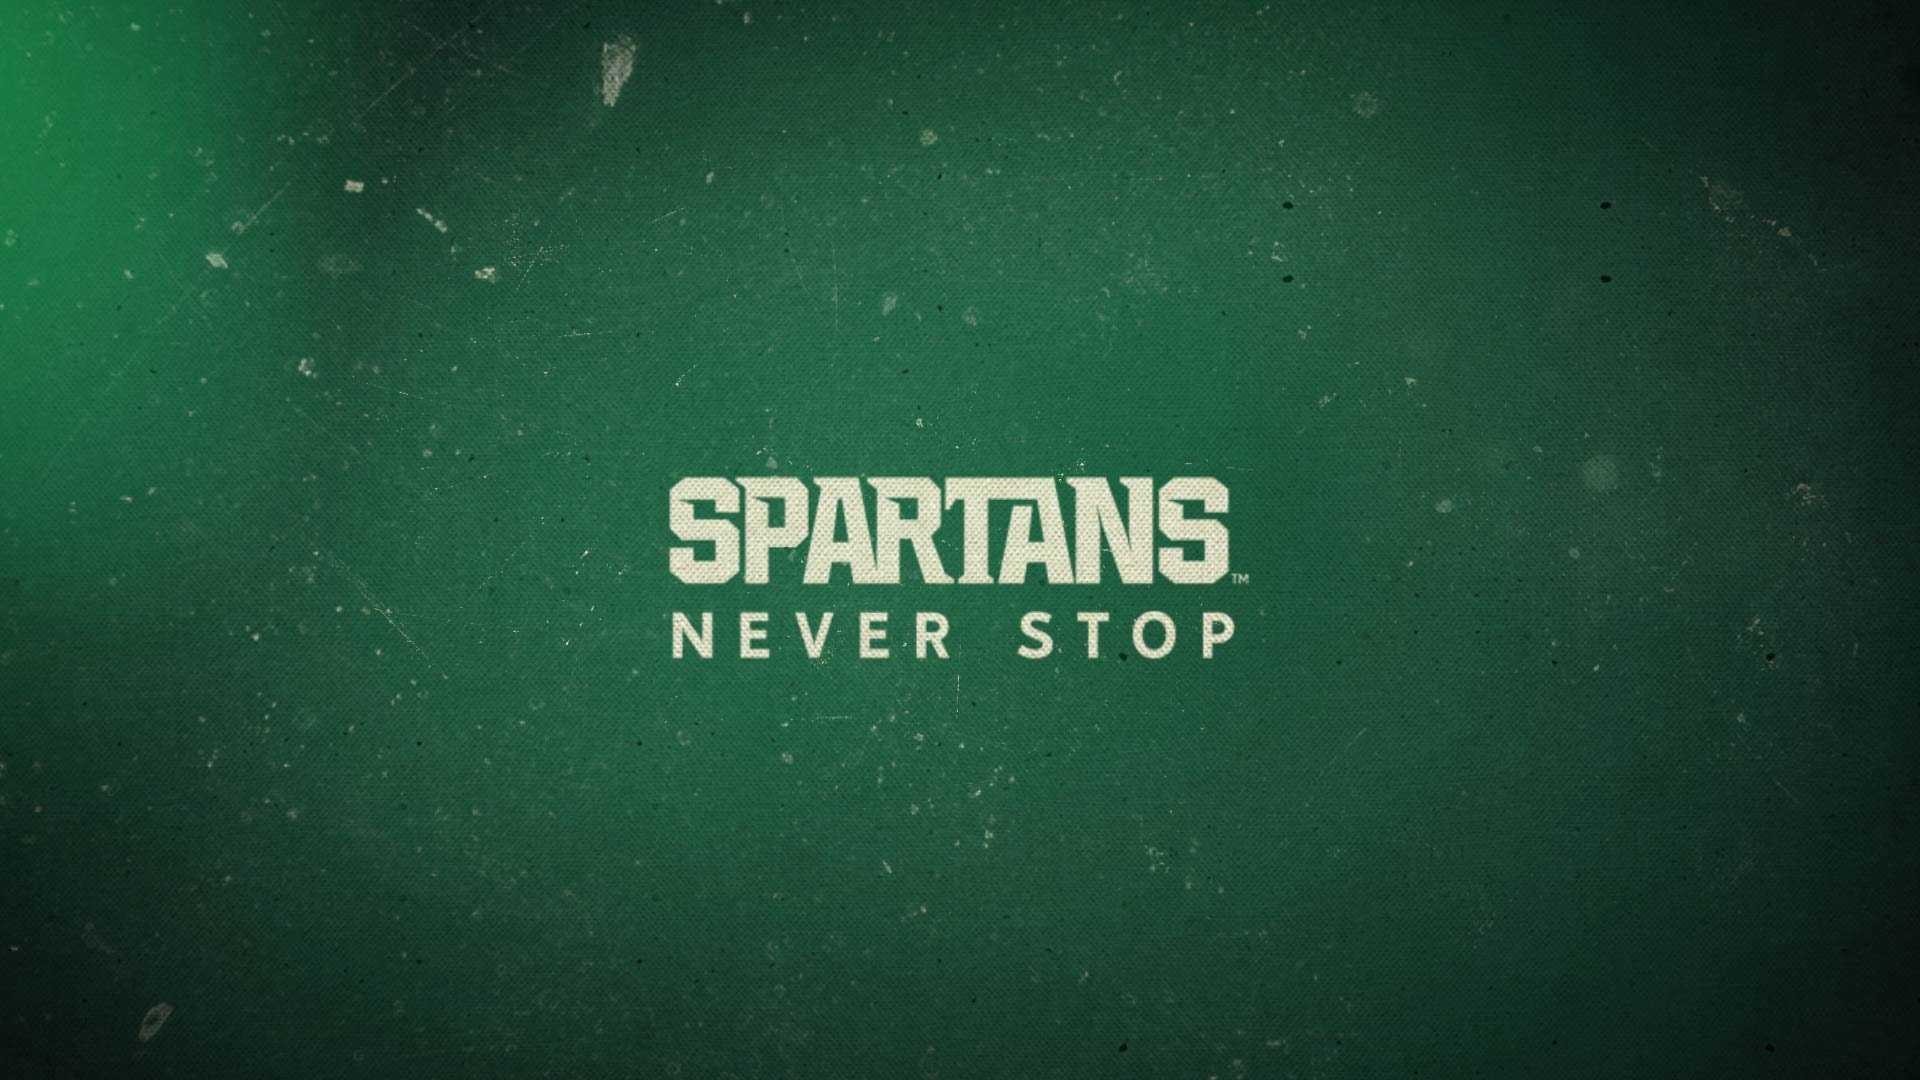 More Designs Added to Spartan Athletics Zoom Backgrounds  Michigan State  University Athletics